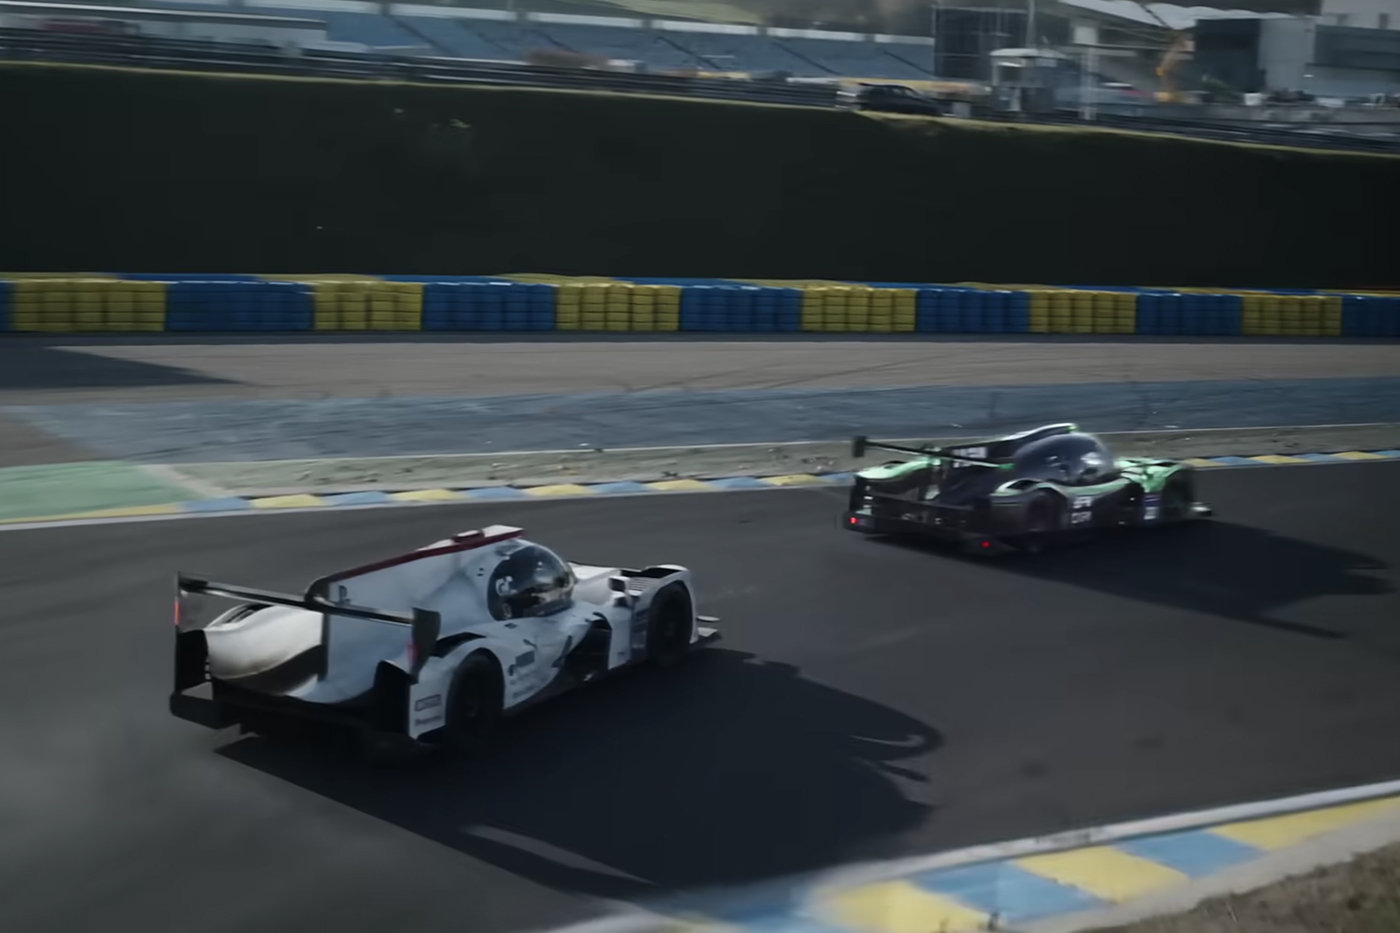 Two racecars speeding along a track